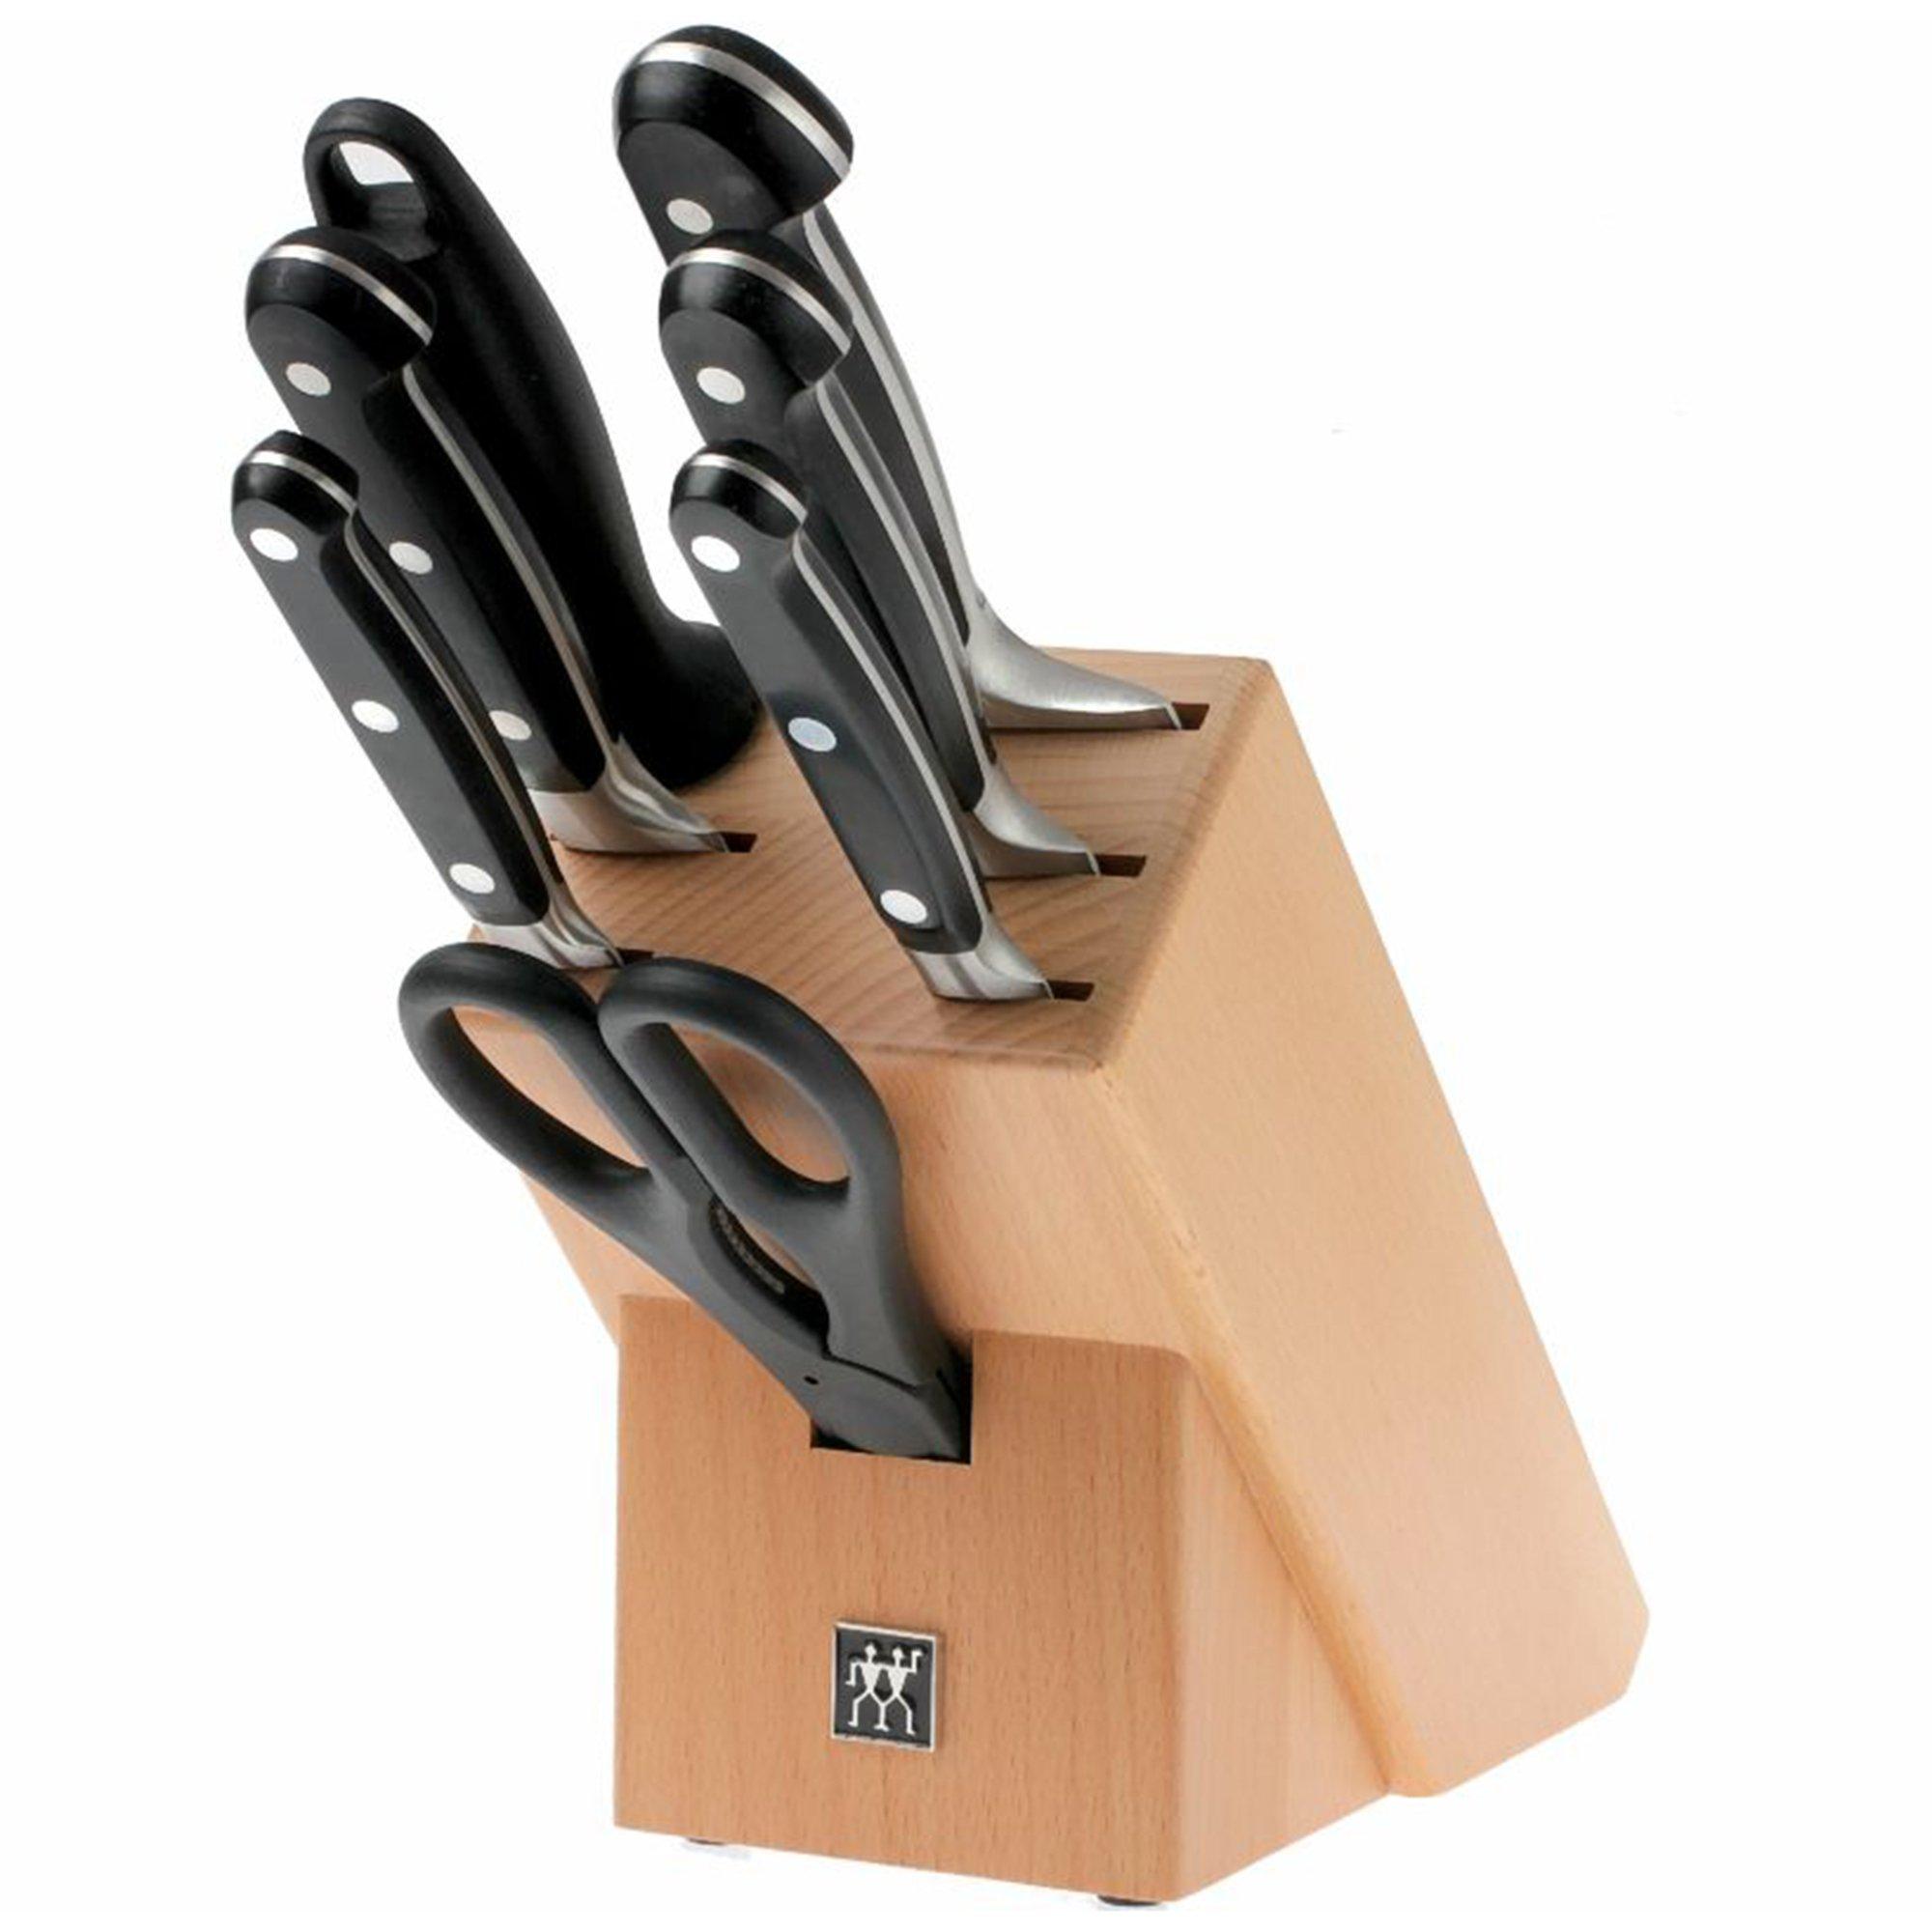 Nontron Traditional Set of 3 Kitchen knives, T3OFRBU 3-piece knife